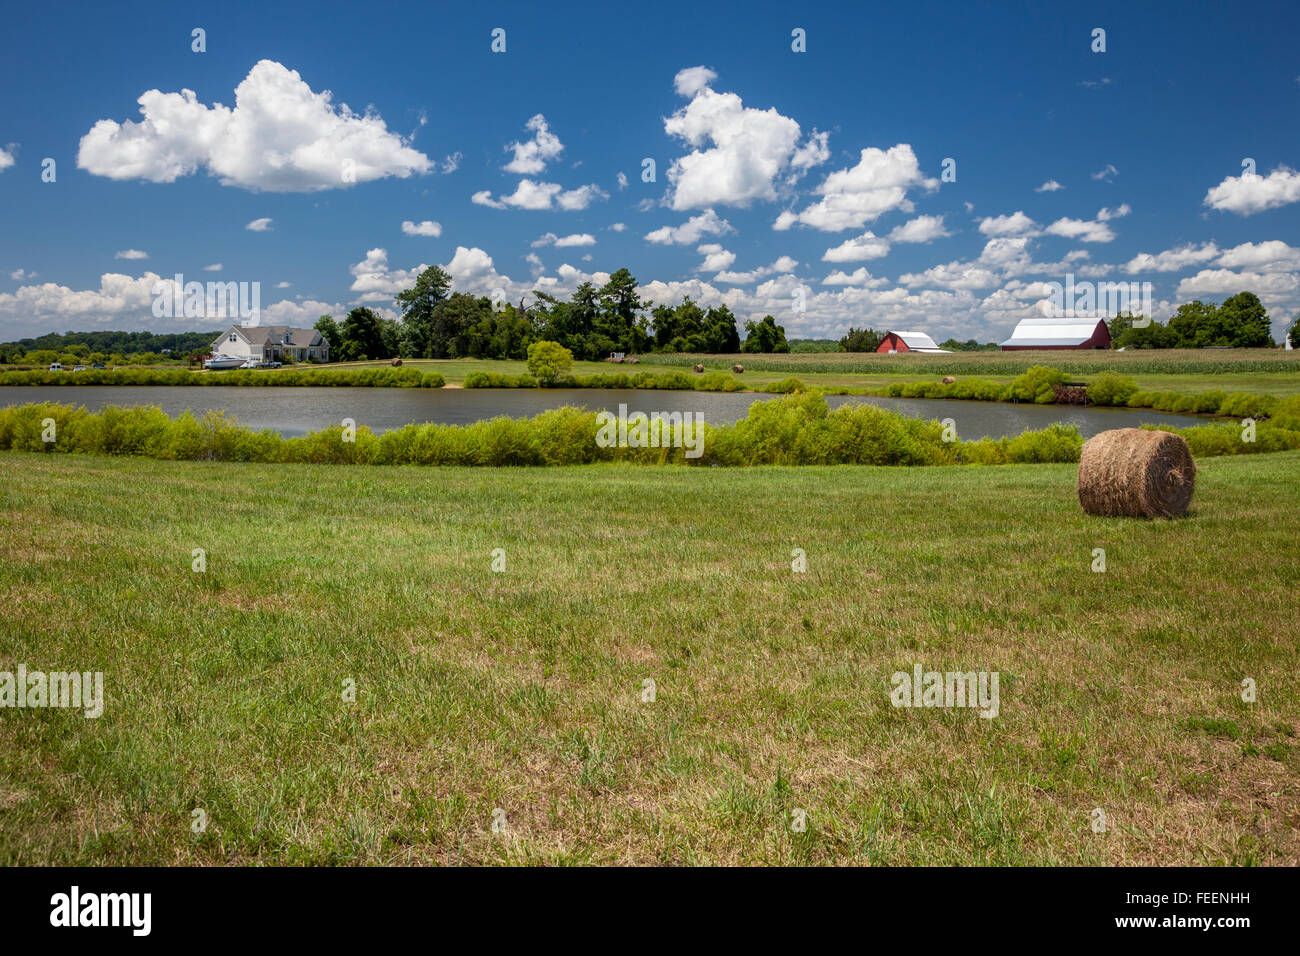 Leonardtown, Maryland, USA.  Farm, with Hay Bale in Pasture, Pond, Barns, Cornfield in Distance. Stock Photo